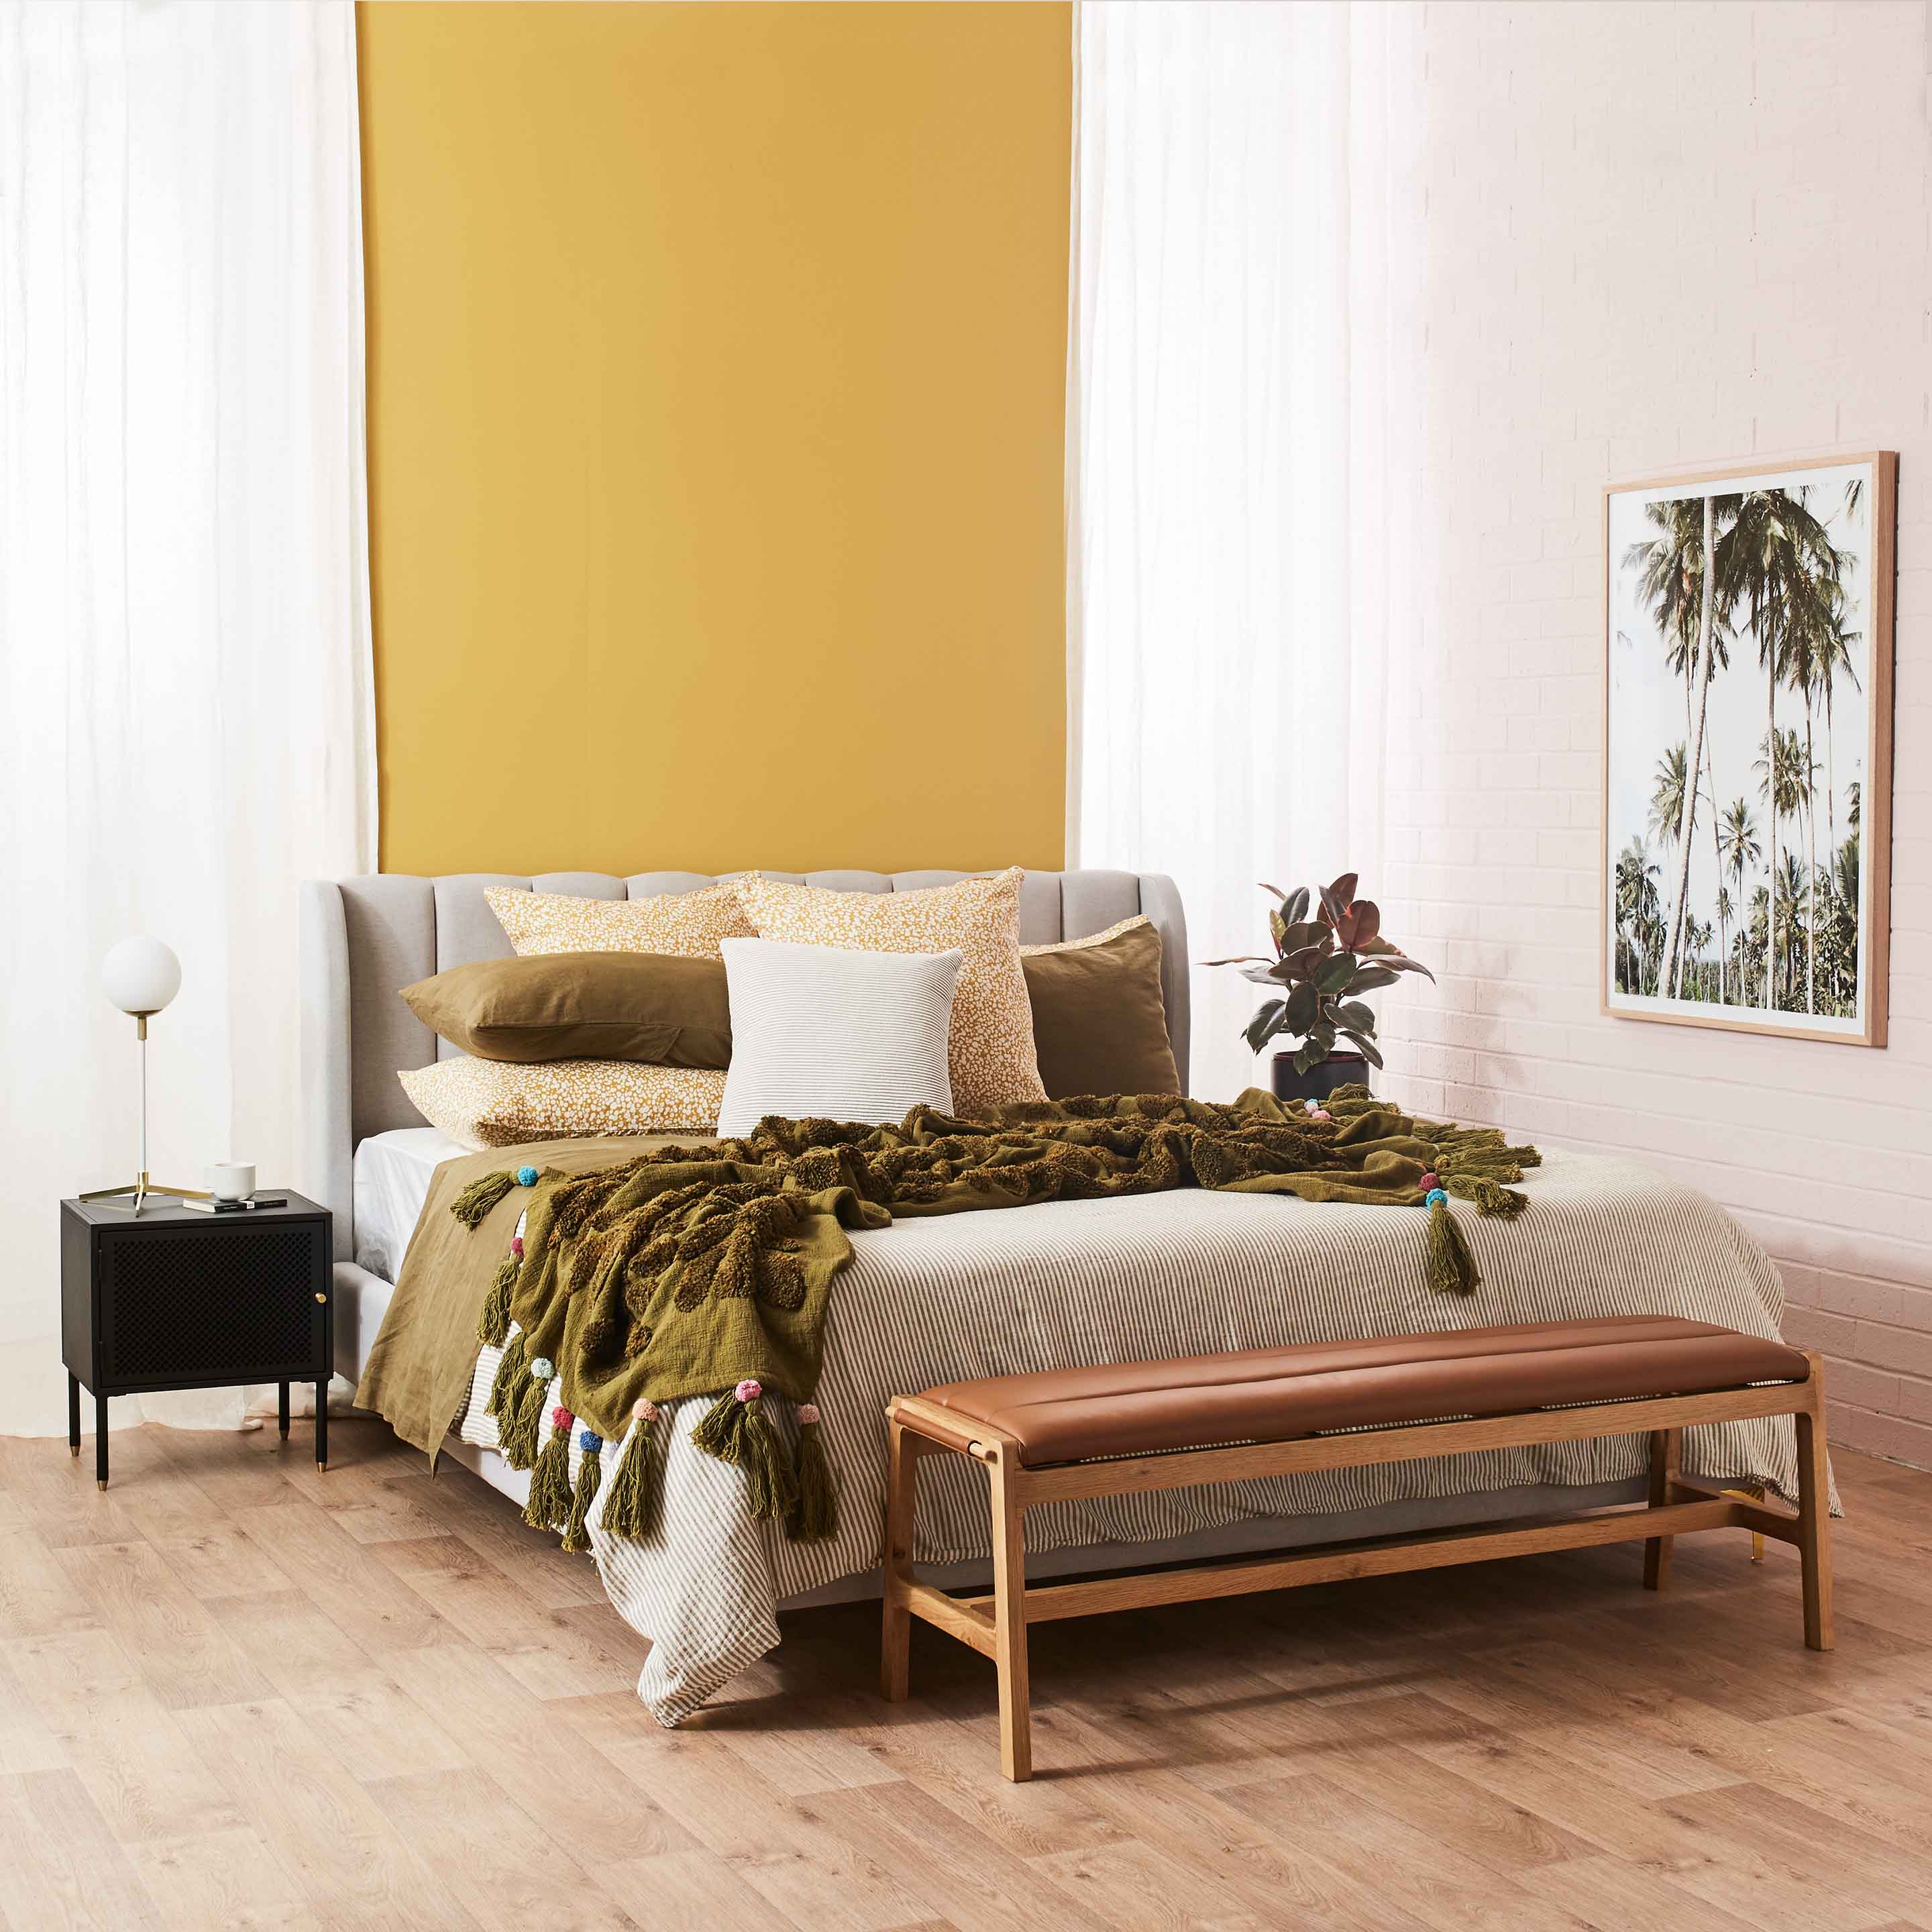 Shop the Georgia bed range in Sydney, Melbourne, and online,